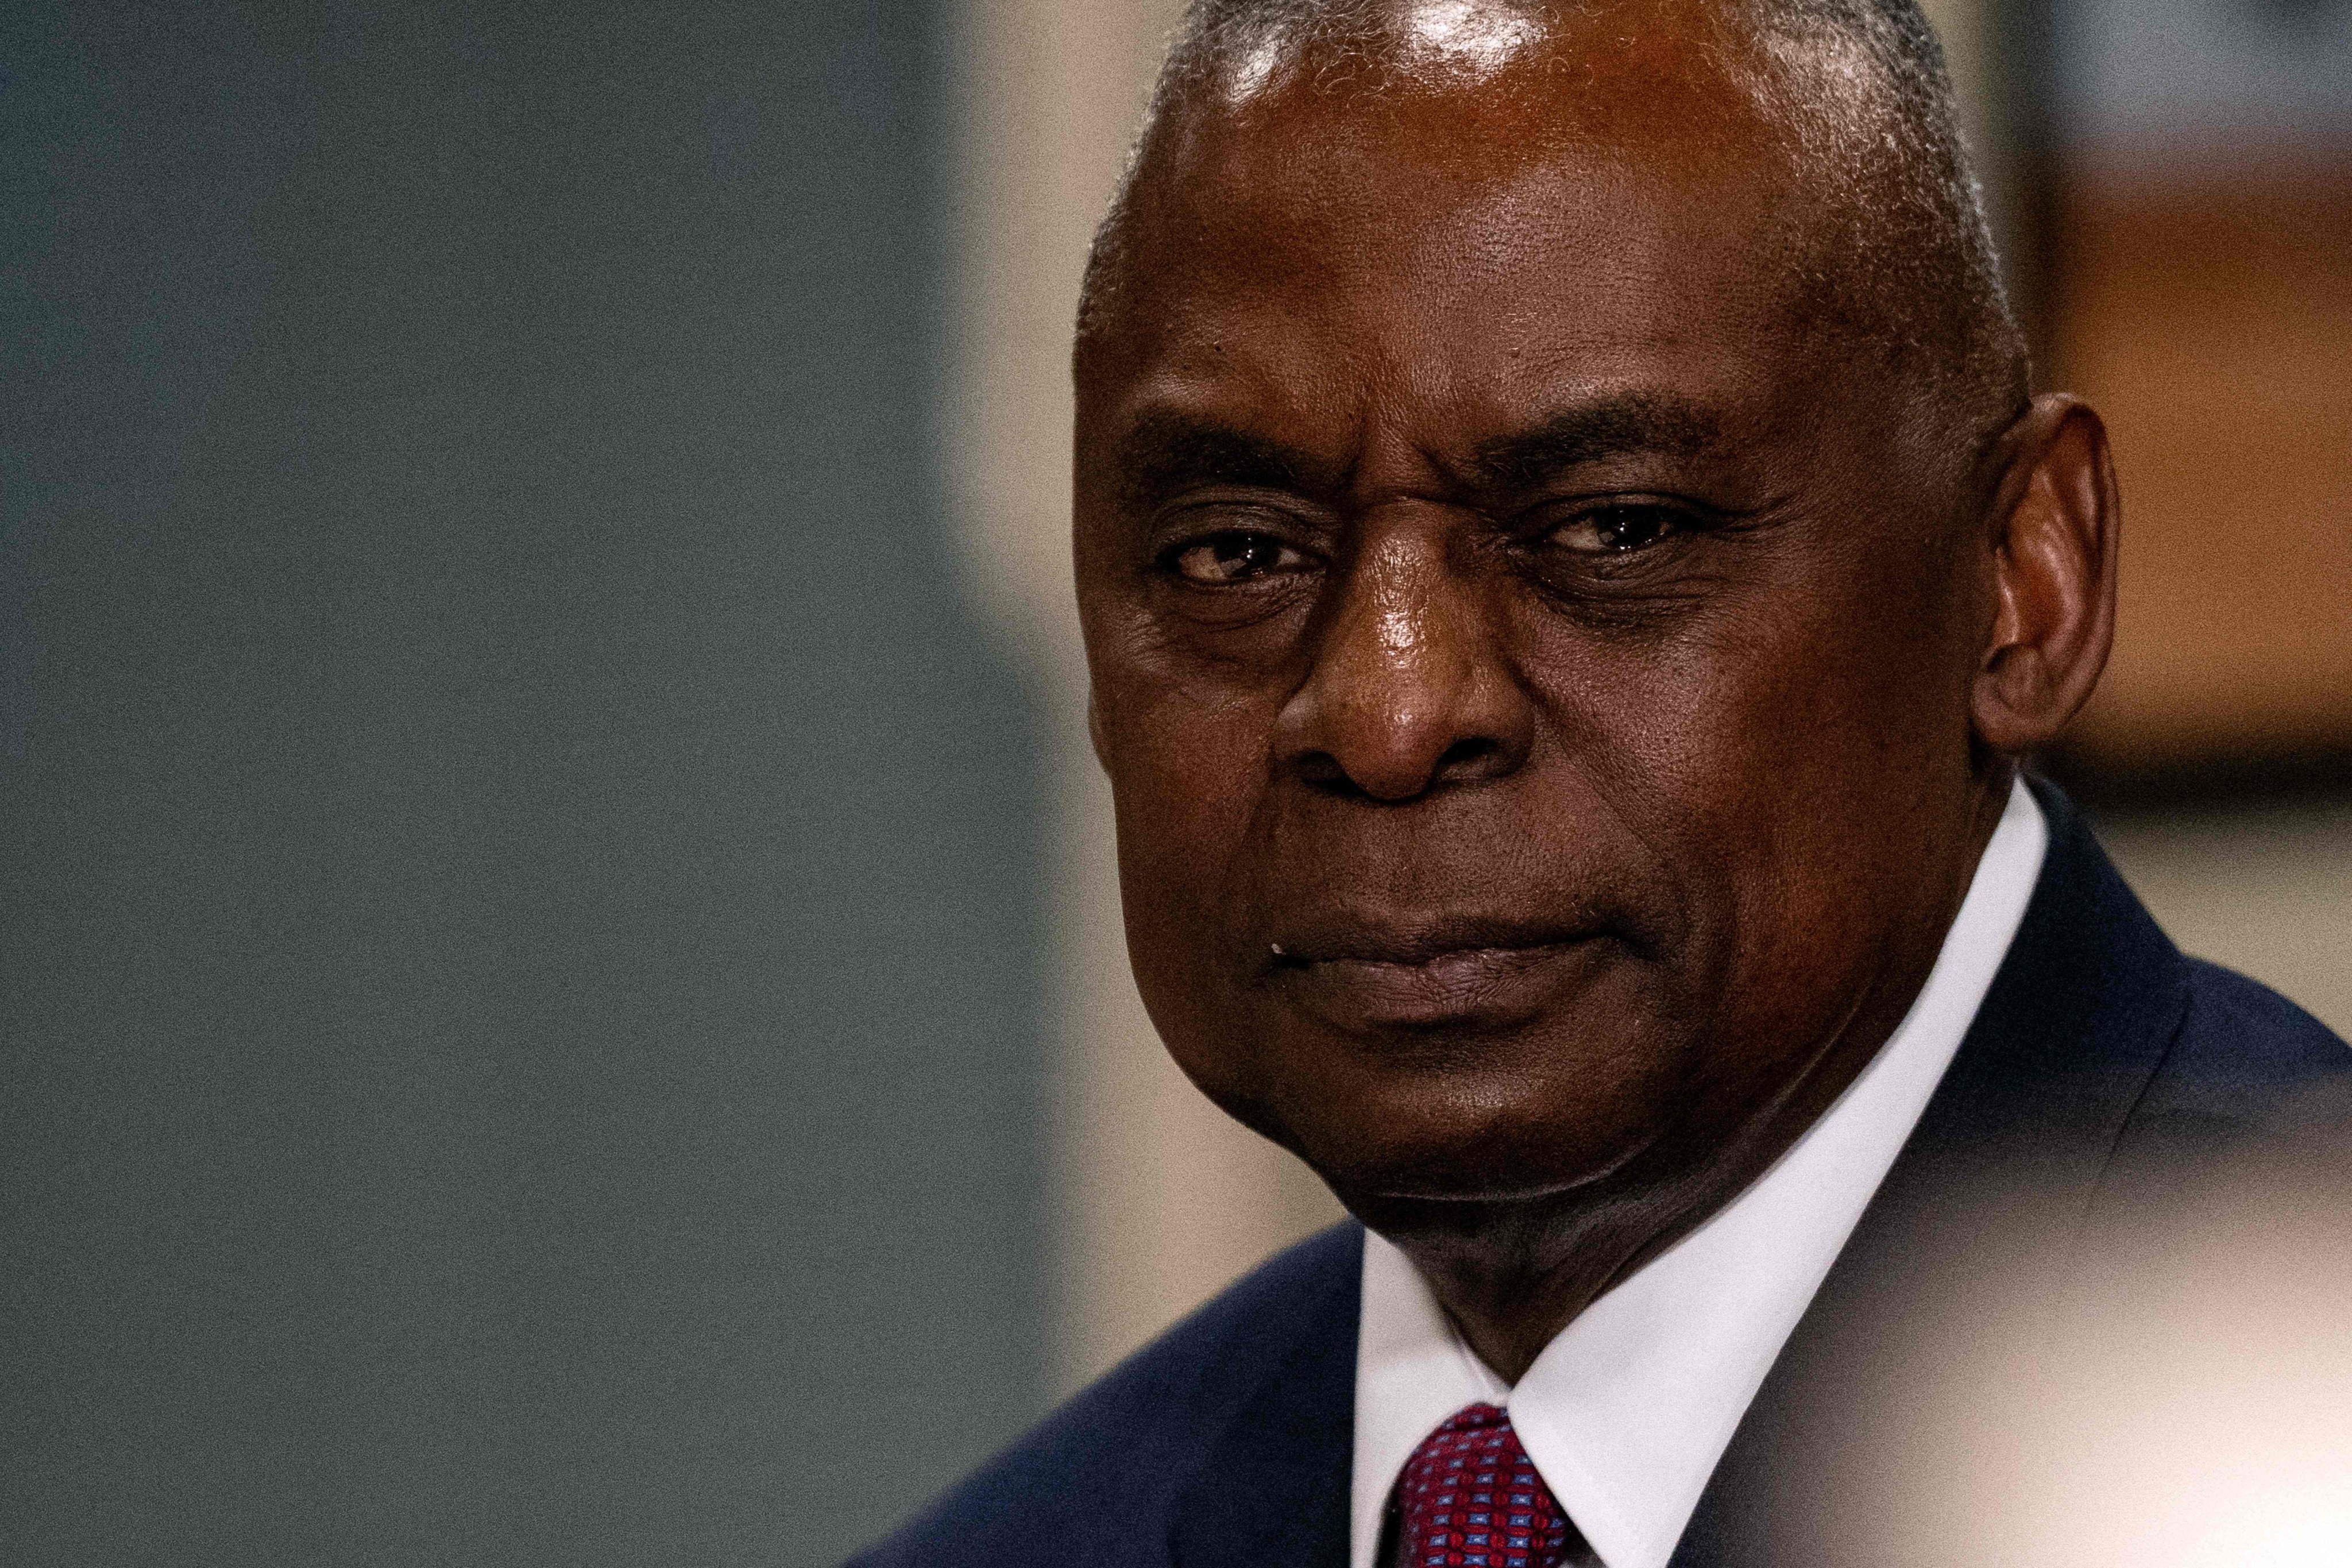 US Defence Secretary Lloyd Austin will reassure Asian allies that Washington is committed to helping the region counter China at this week’s annual Shangri-La Dialogue. Photo: Getty Images via AFP